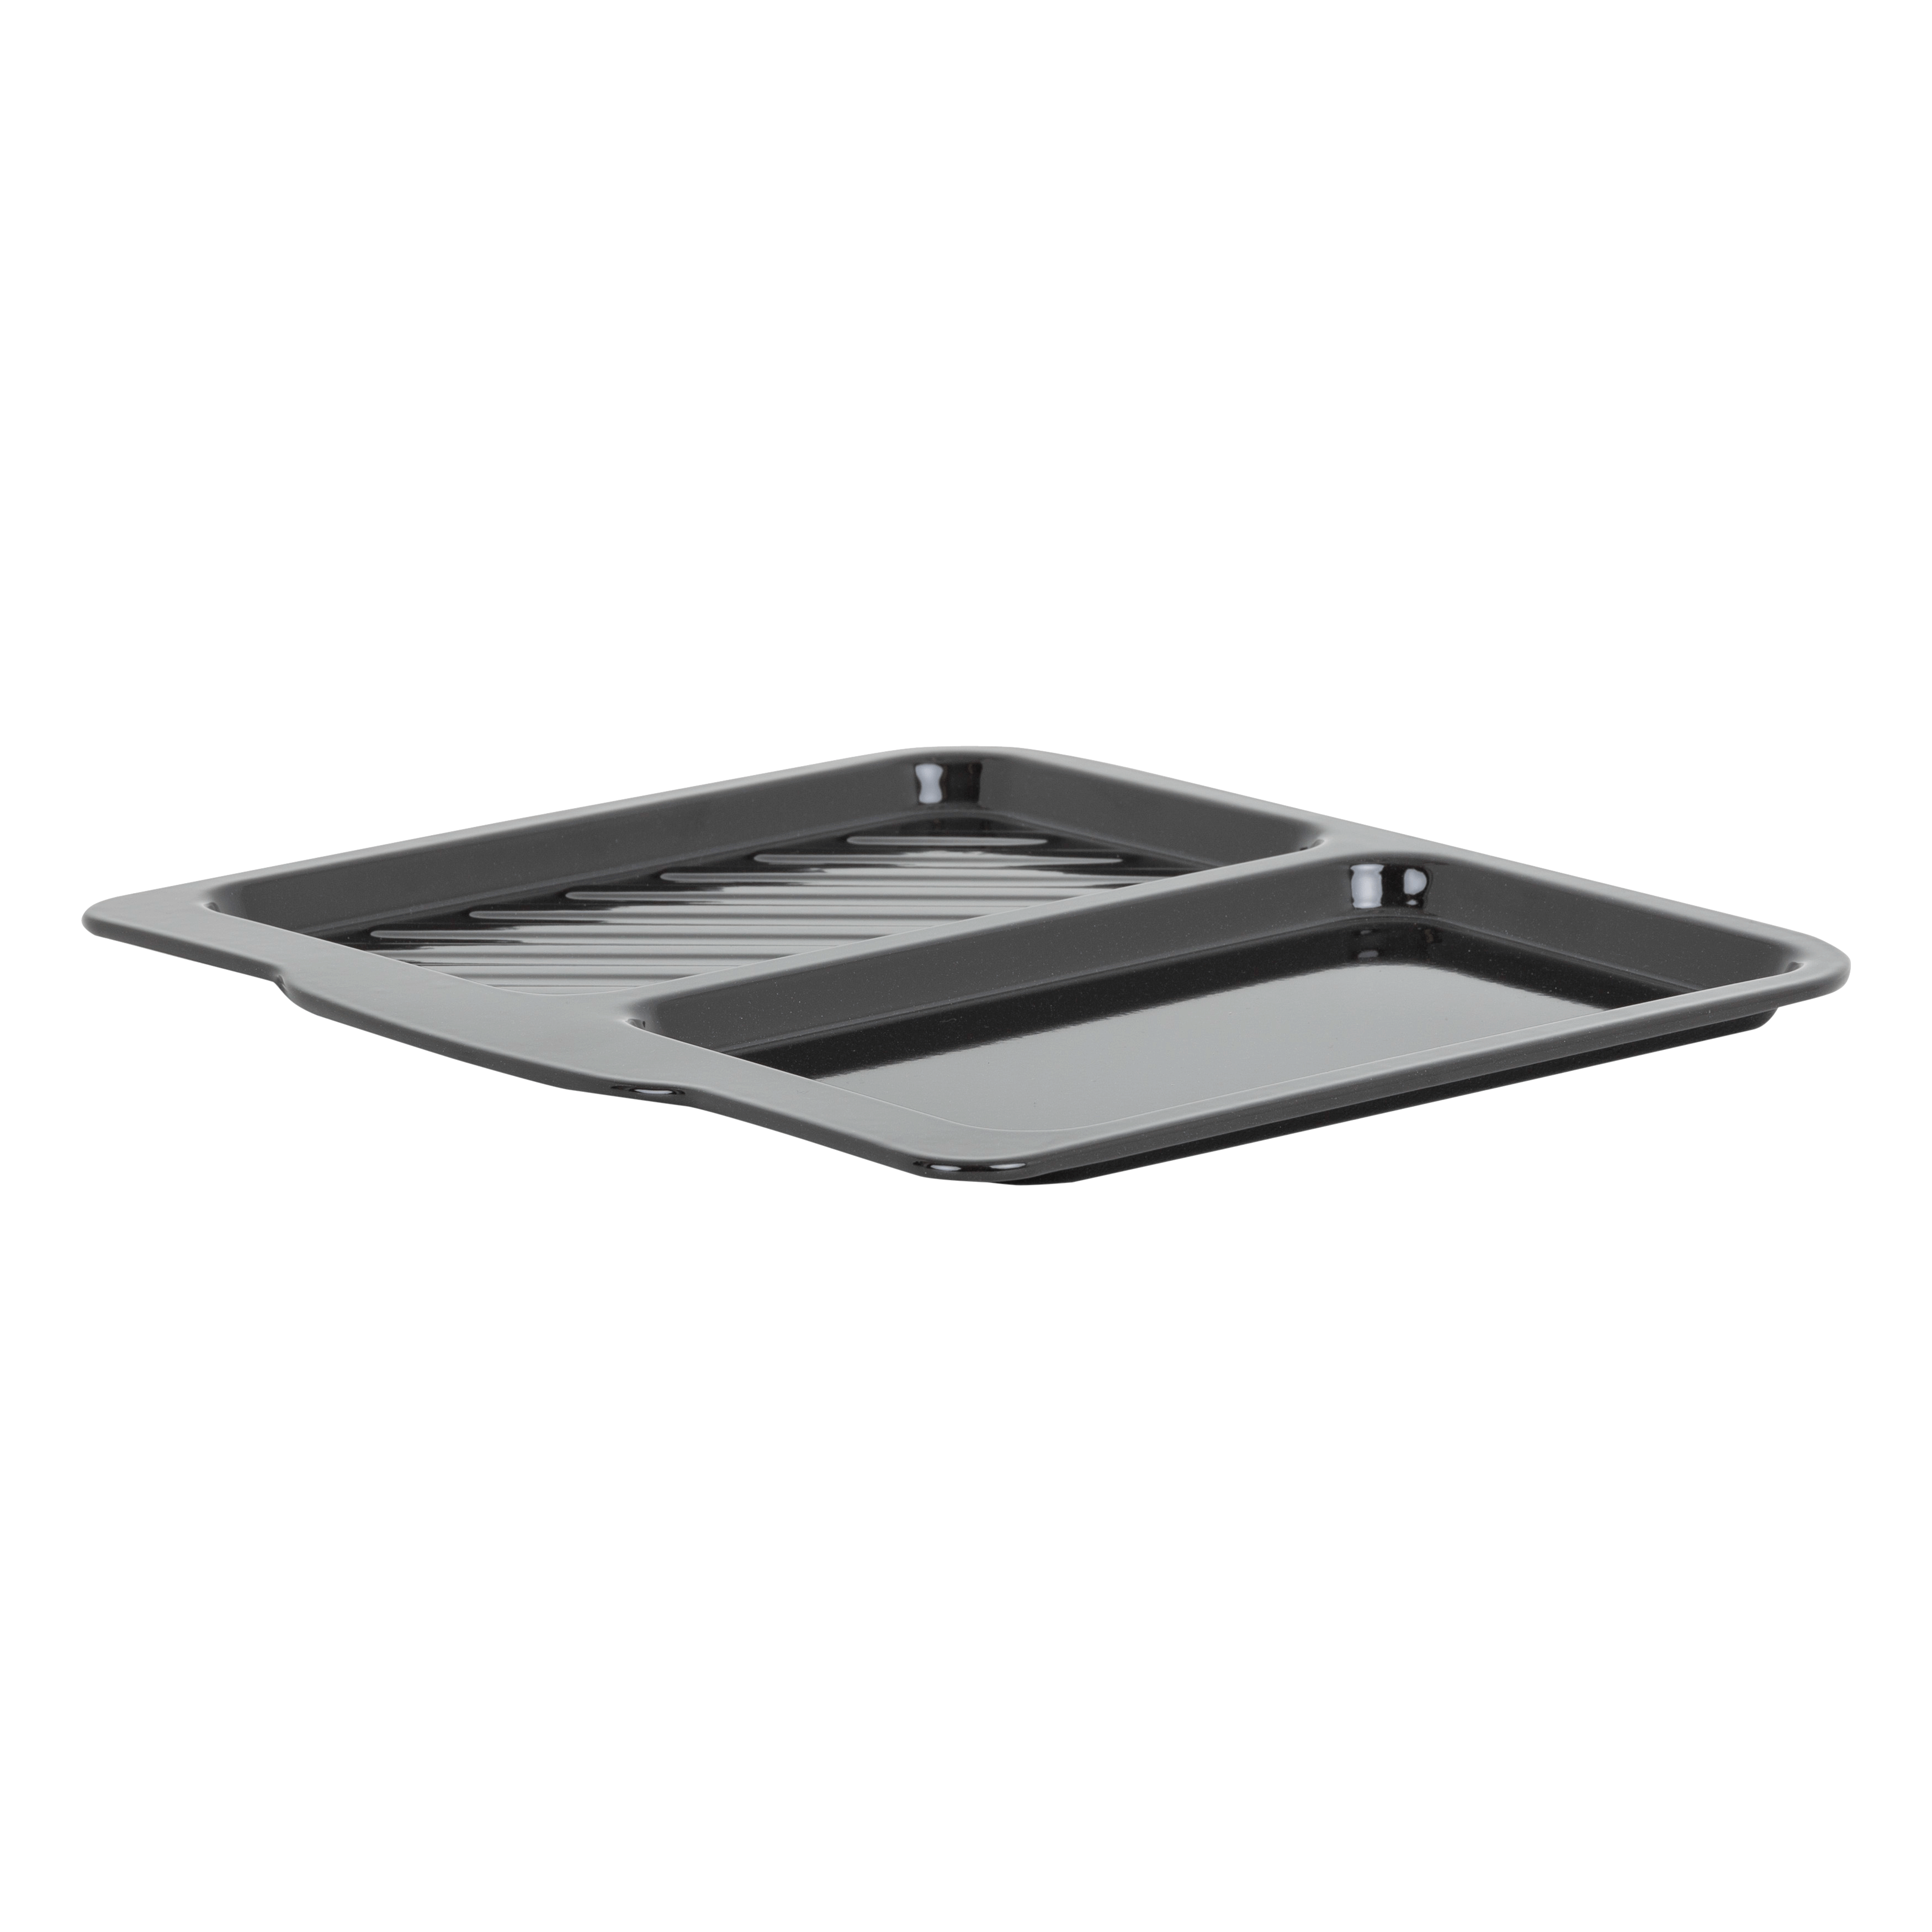 55441_Dual oven tray 004